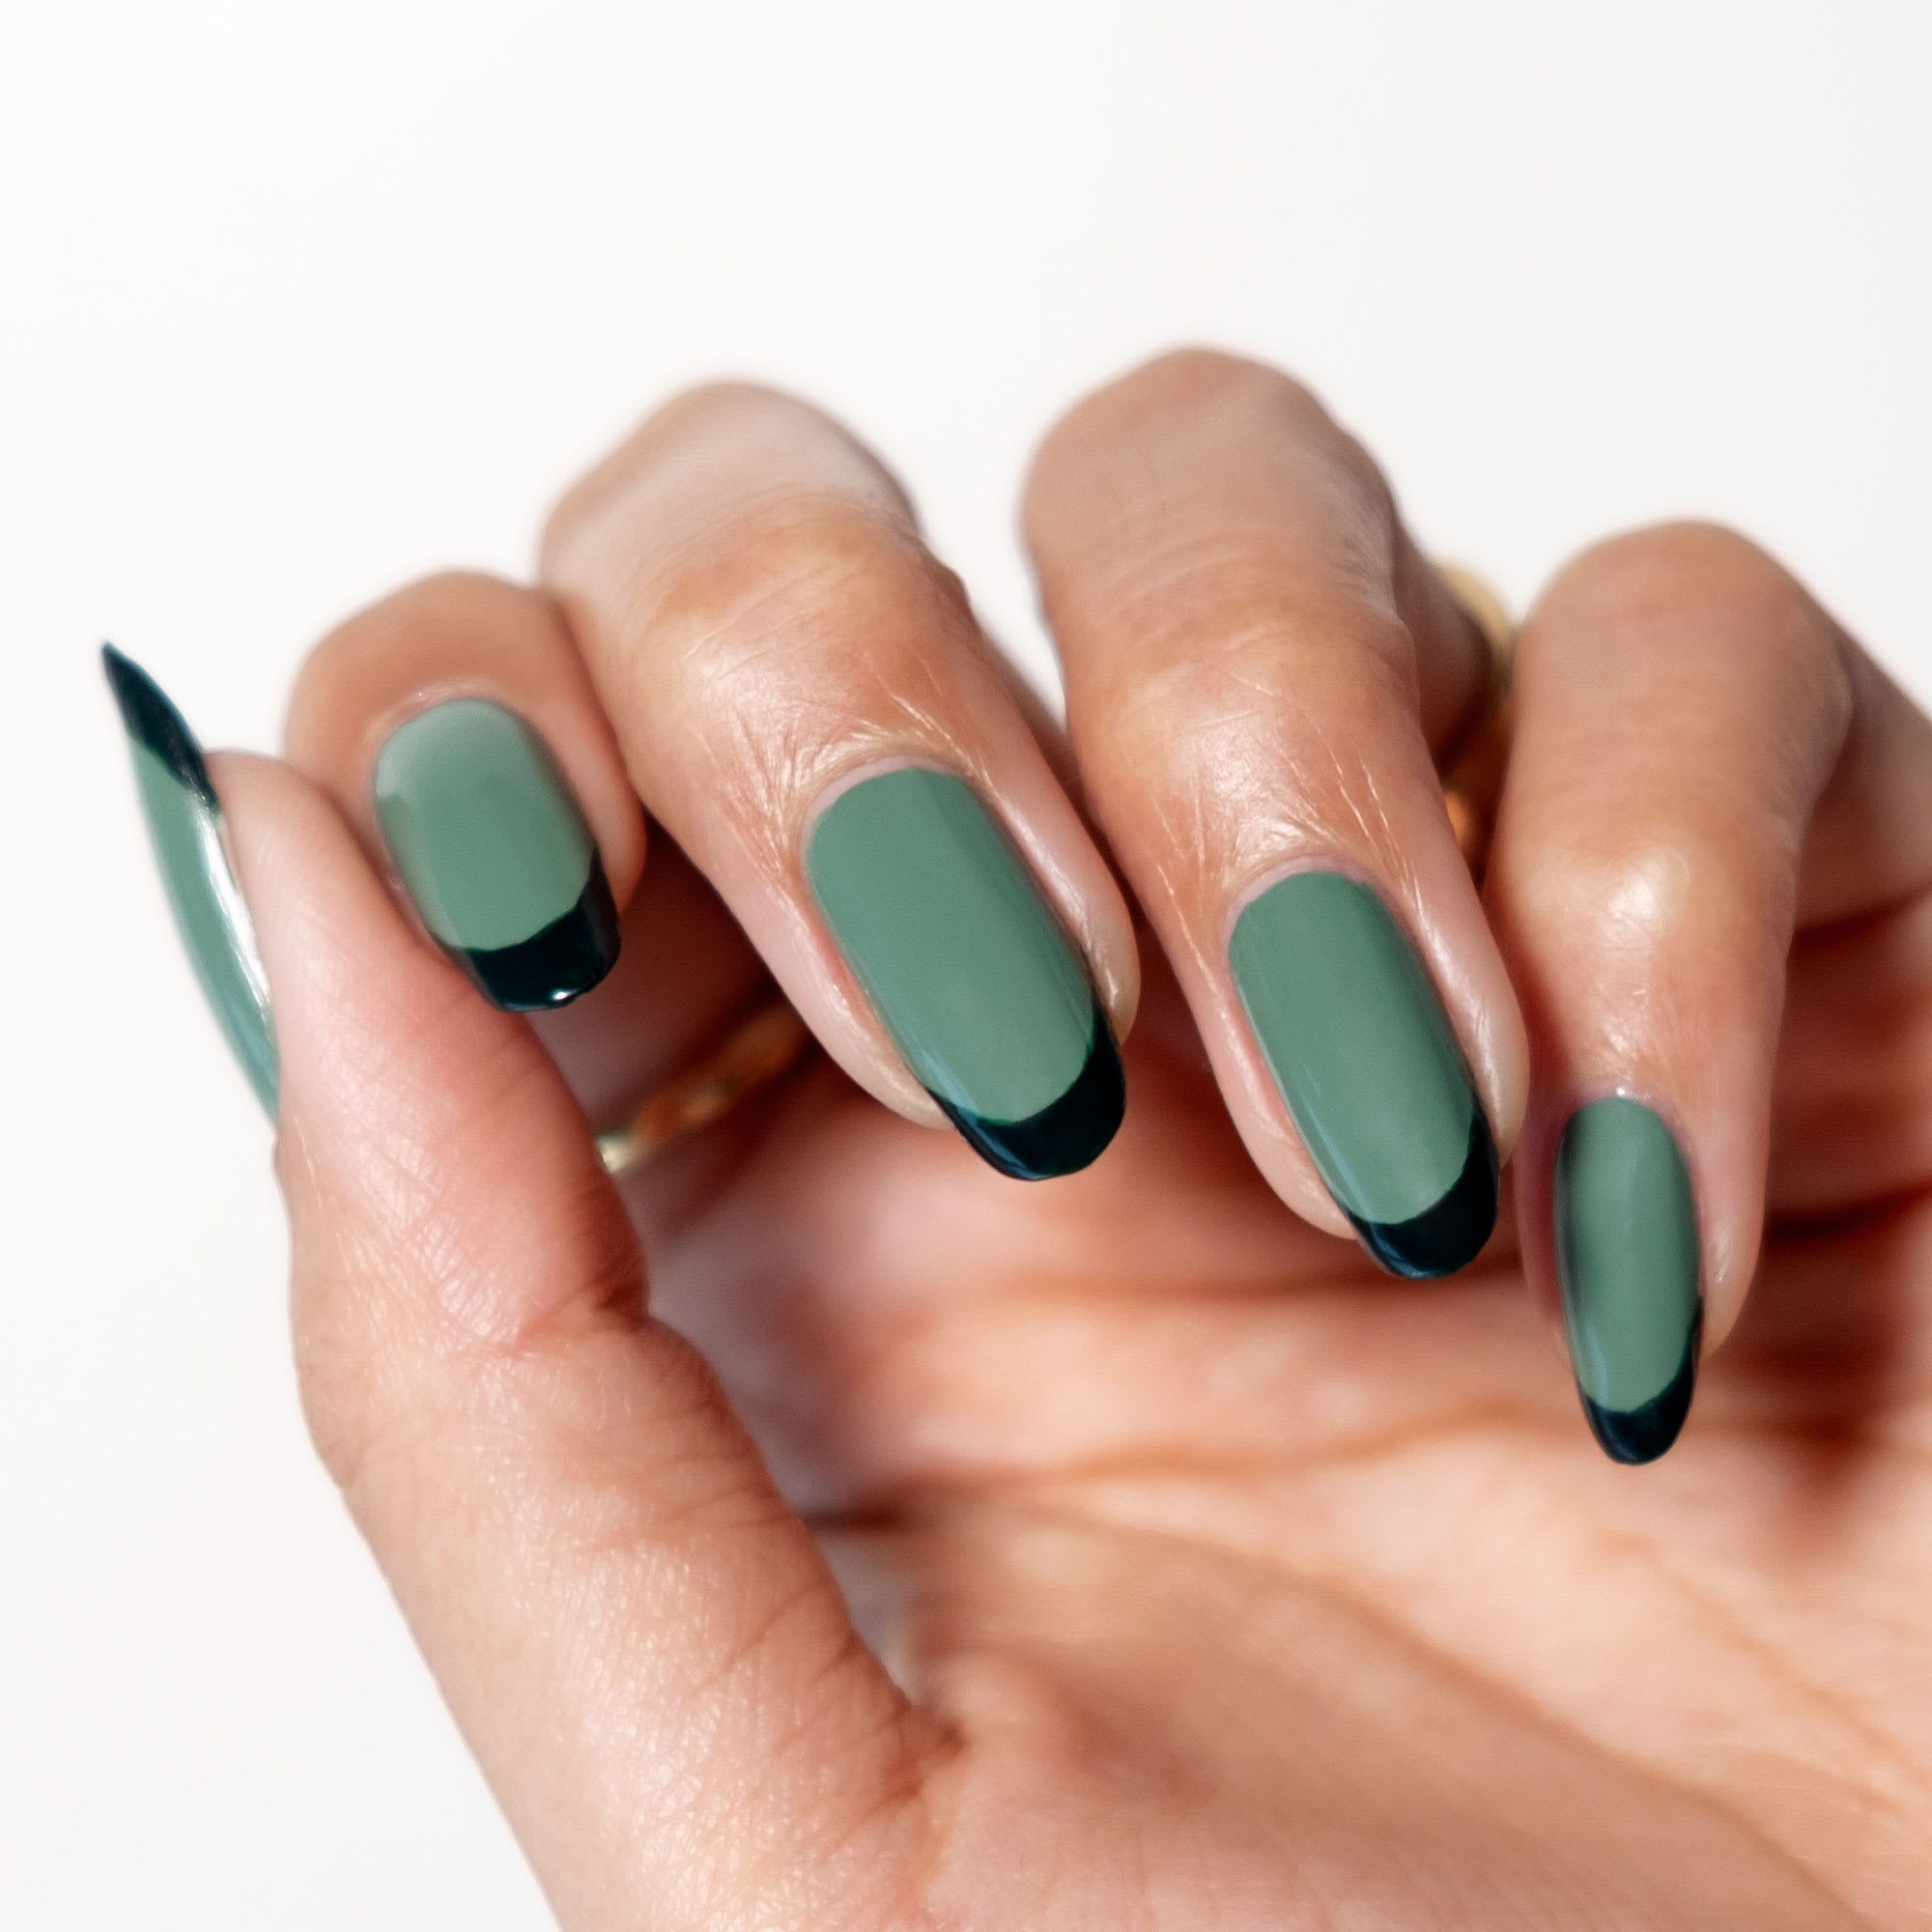 Dark green nails have won our hearts and hands this December. Rich and cozy  - perfect for both glossy and matte finishes. Seen here is… | Instagram